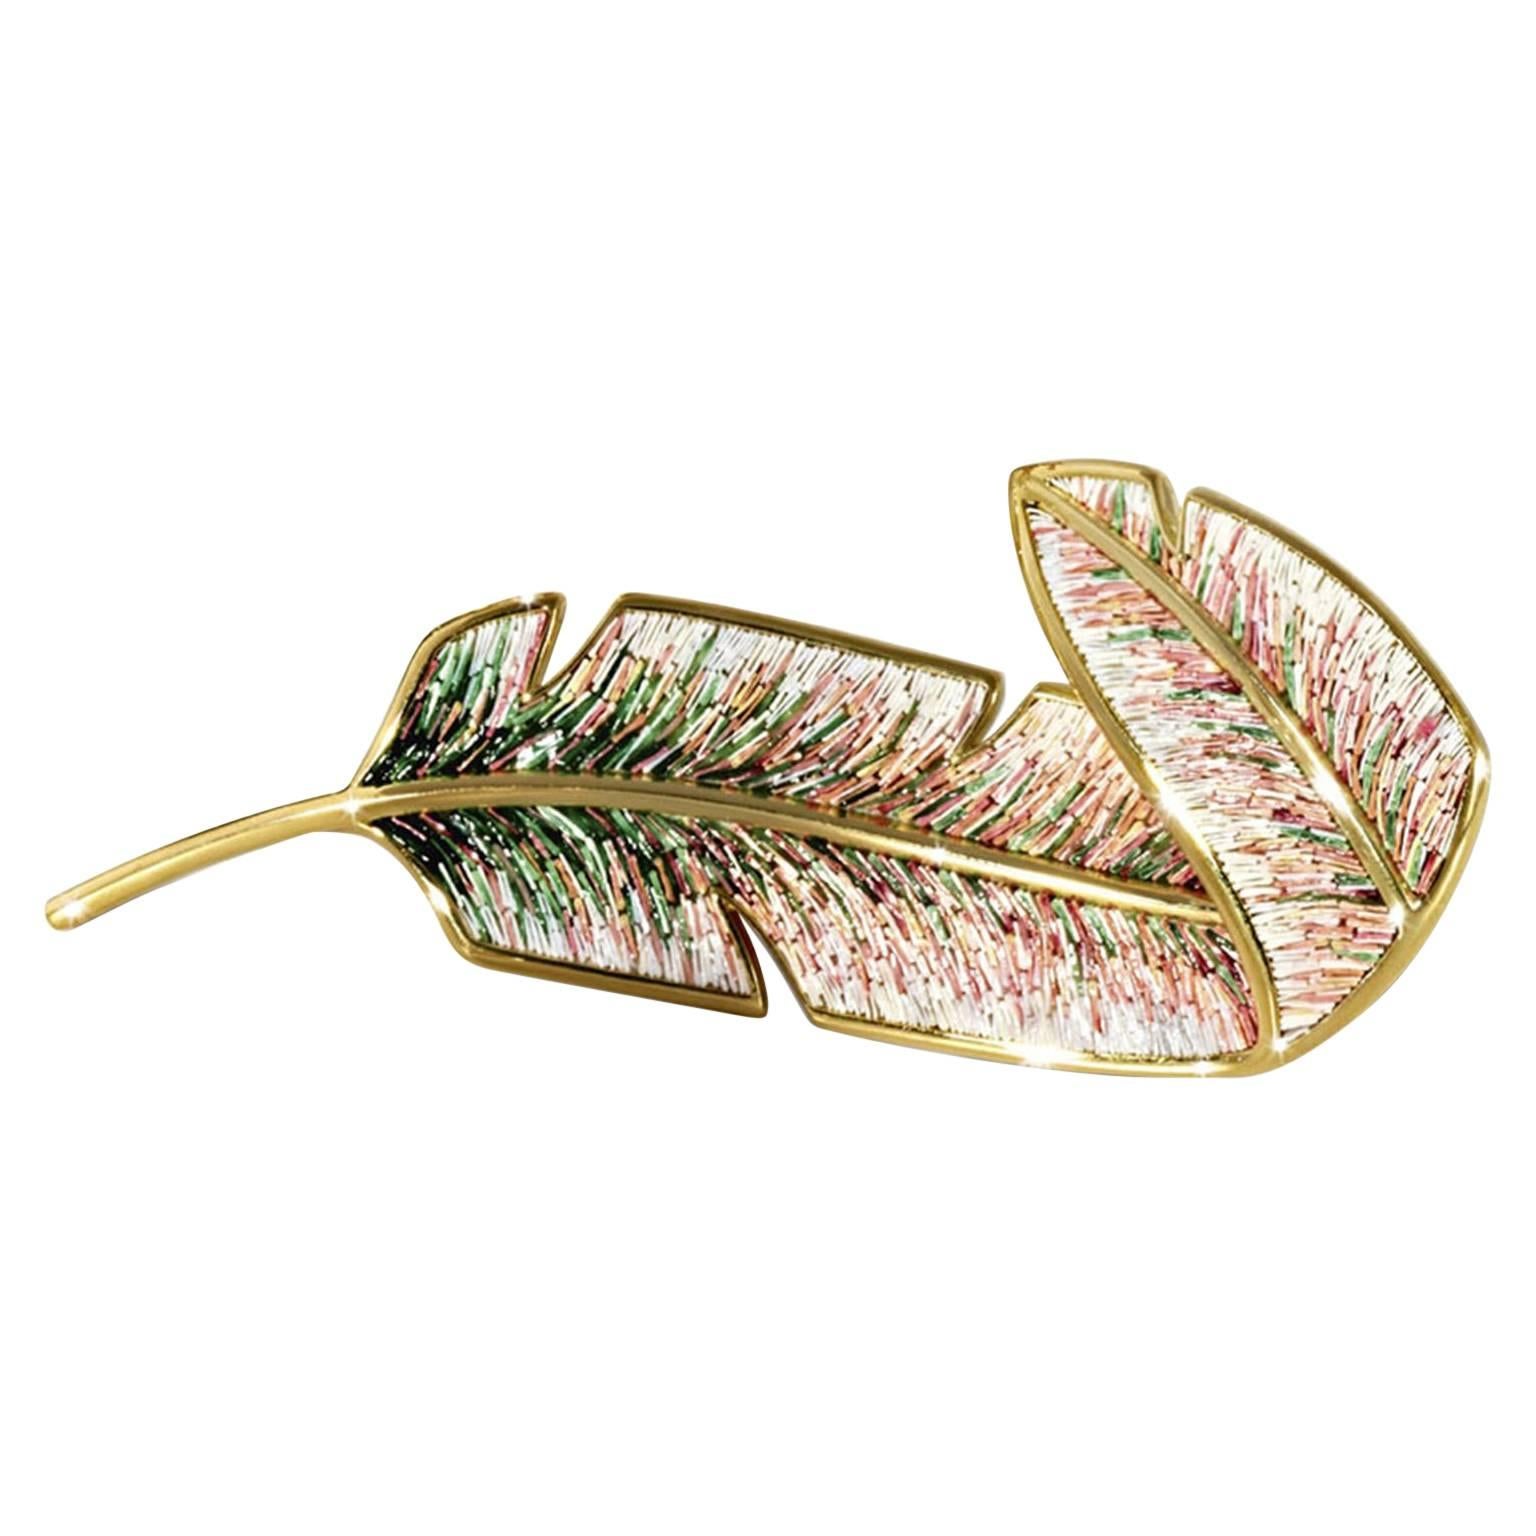 Stylish Brooch Designed by Rogers Thomas Gold and Micromosaic For Sale